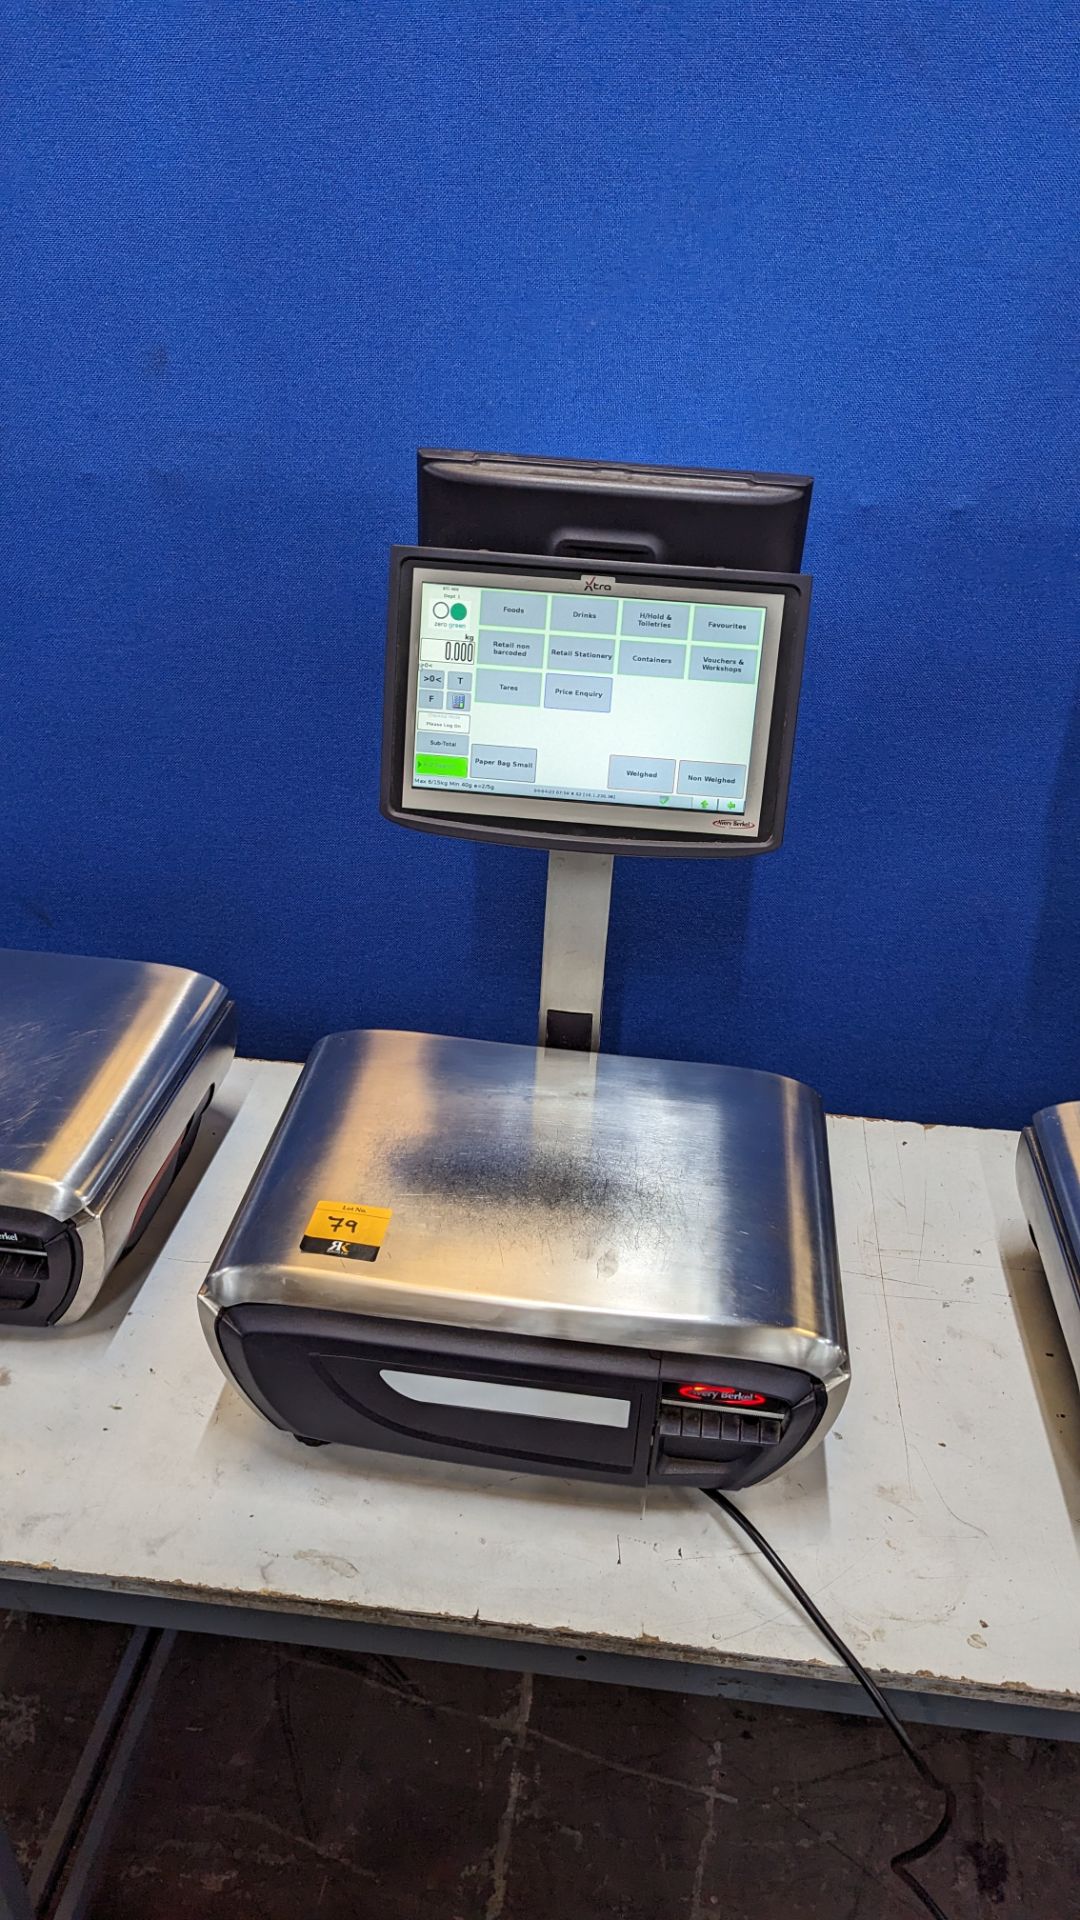 Avery Berkel Xti 400 Label & Receipt printing scale. 6kg/15kg capacity. These scales include a 10" - Image 15 of 17